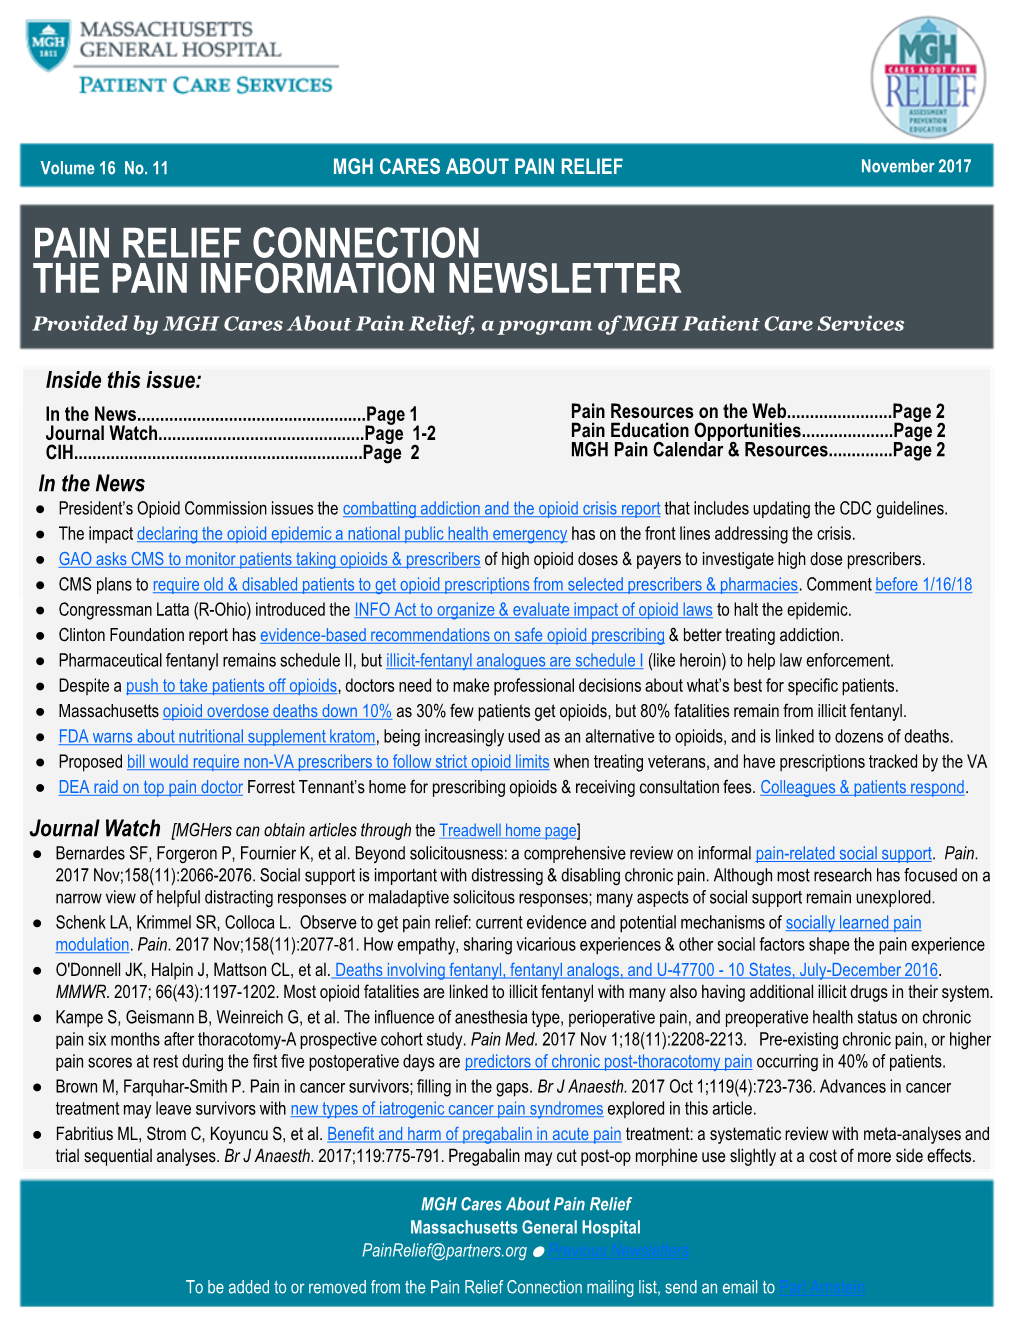 PAIN RELIEF CONNECTION the PAIN INFORMATION NEWSLETTER Provided by MGH Cares About Pain Relief, a Program of MGH Patient Care Services